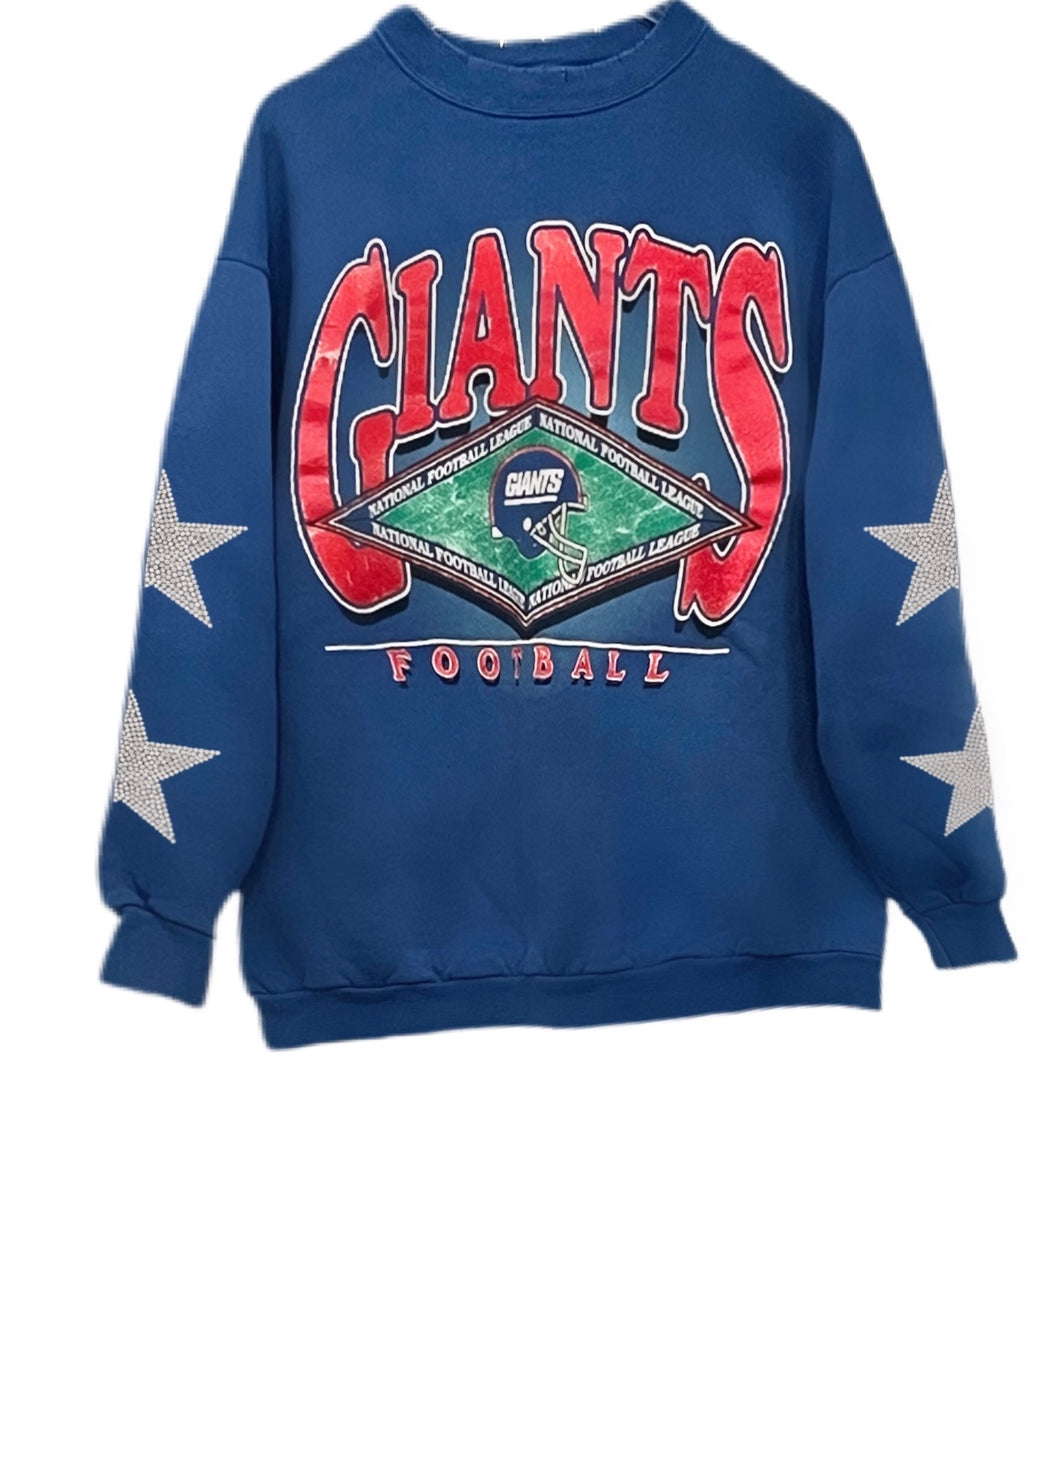 NY Giants, NFL One of a KIND Vintage Sweatshirt with Crystal Star Design